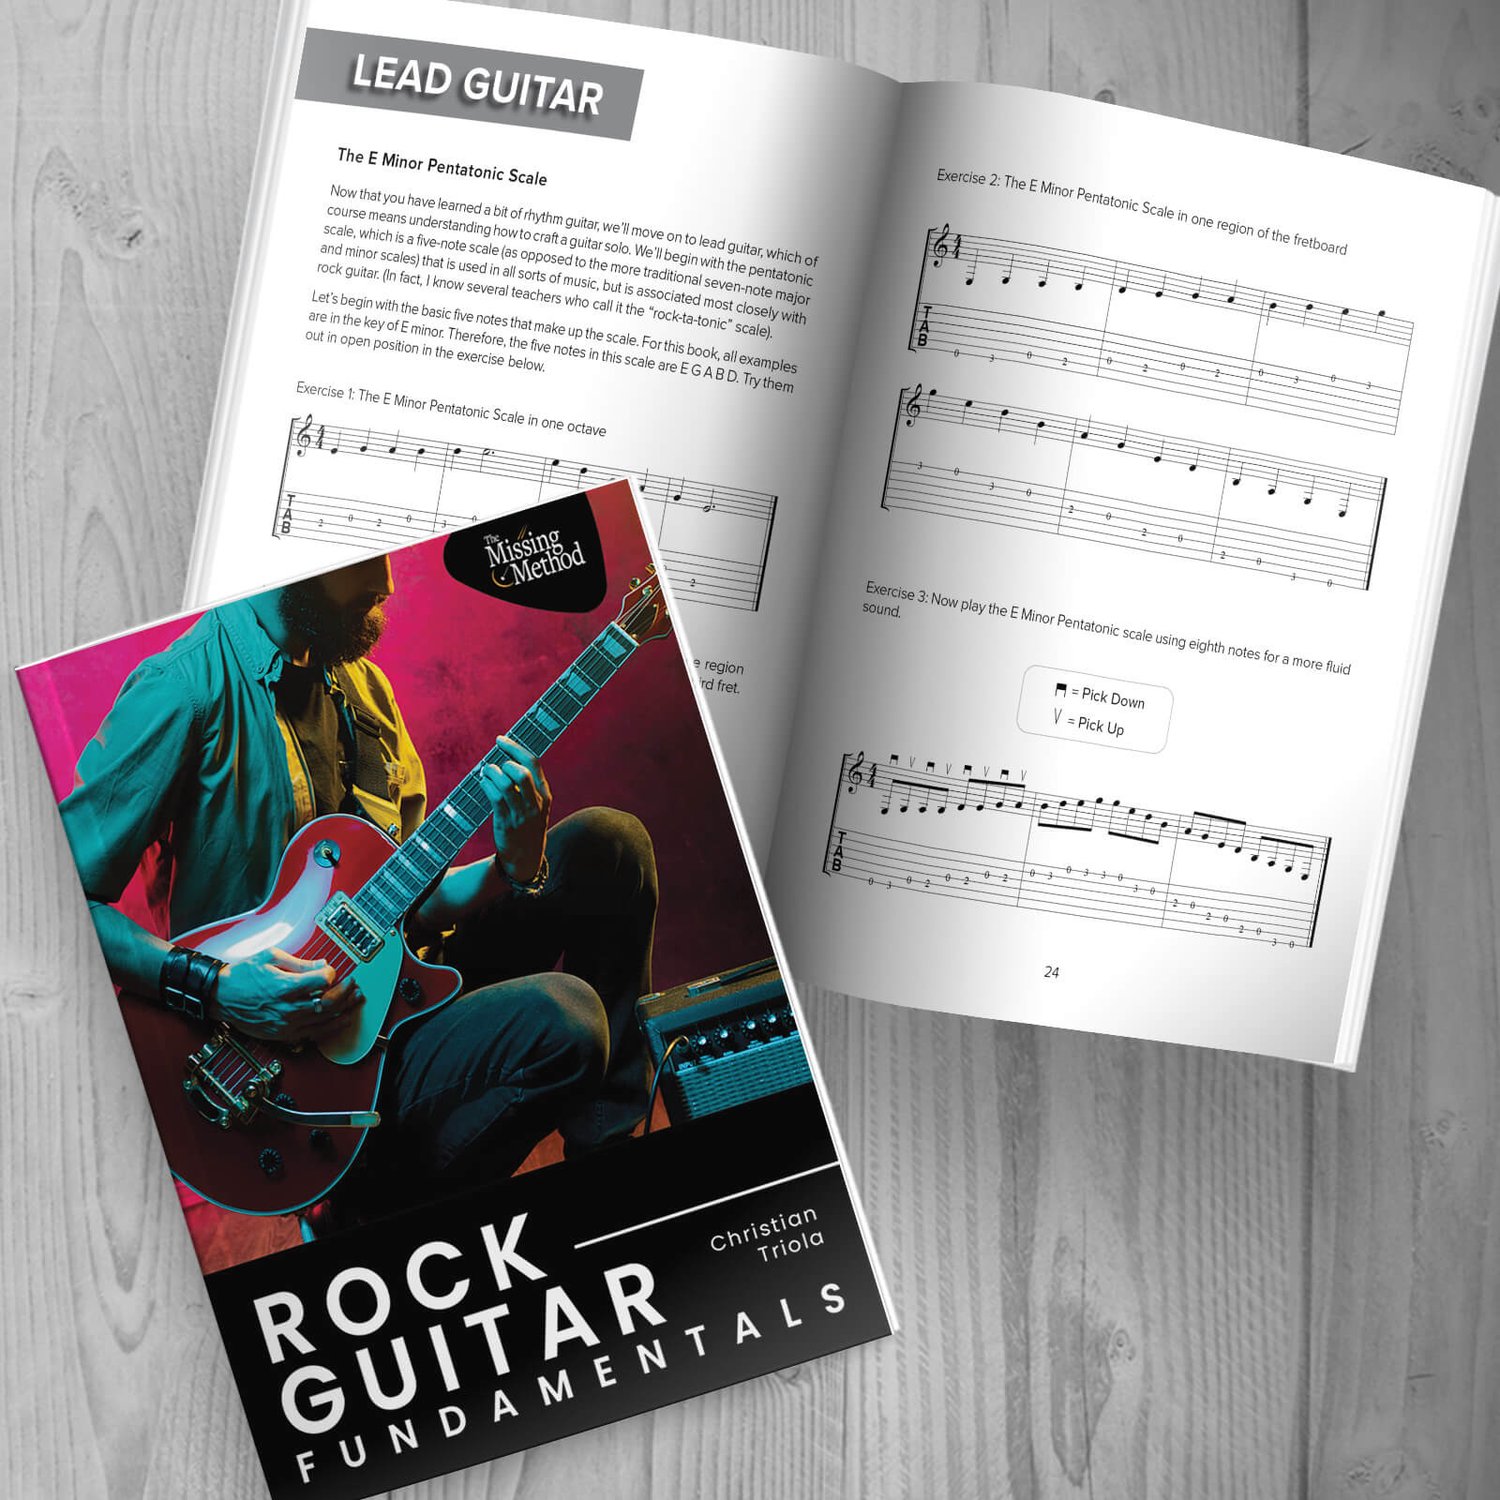 Rock Guitar Fundamentals from The Missing Method for Guitar